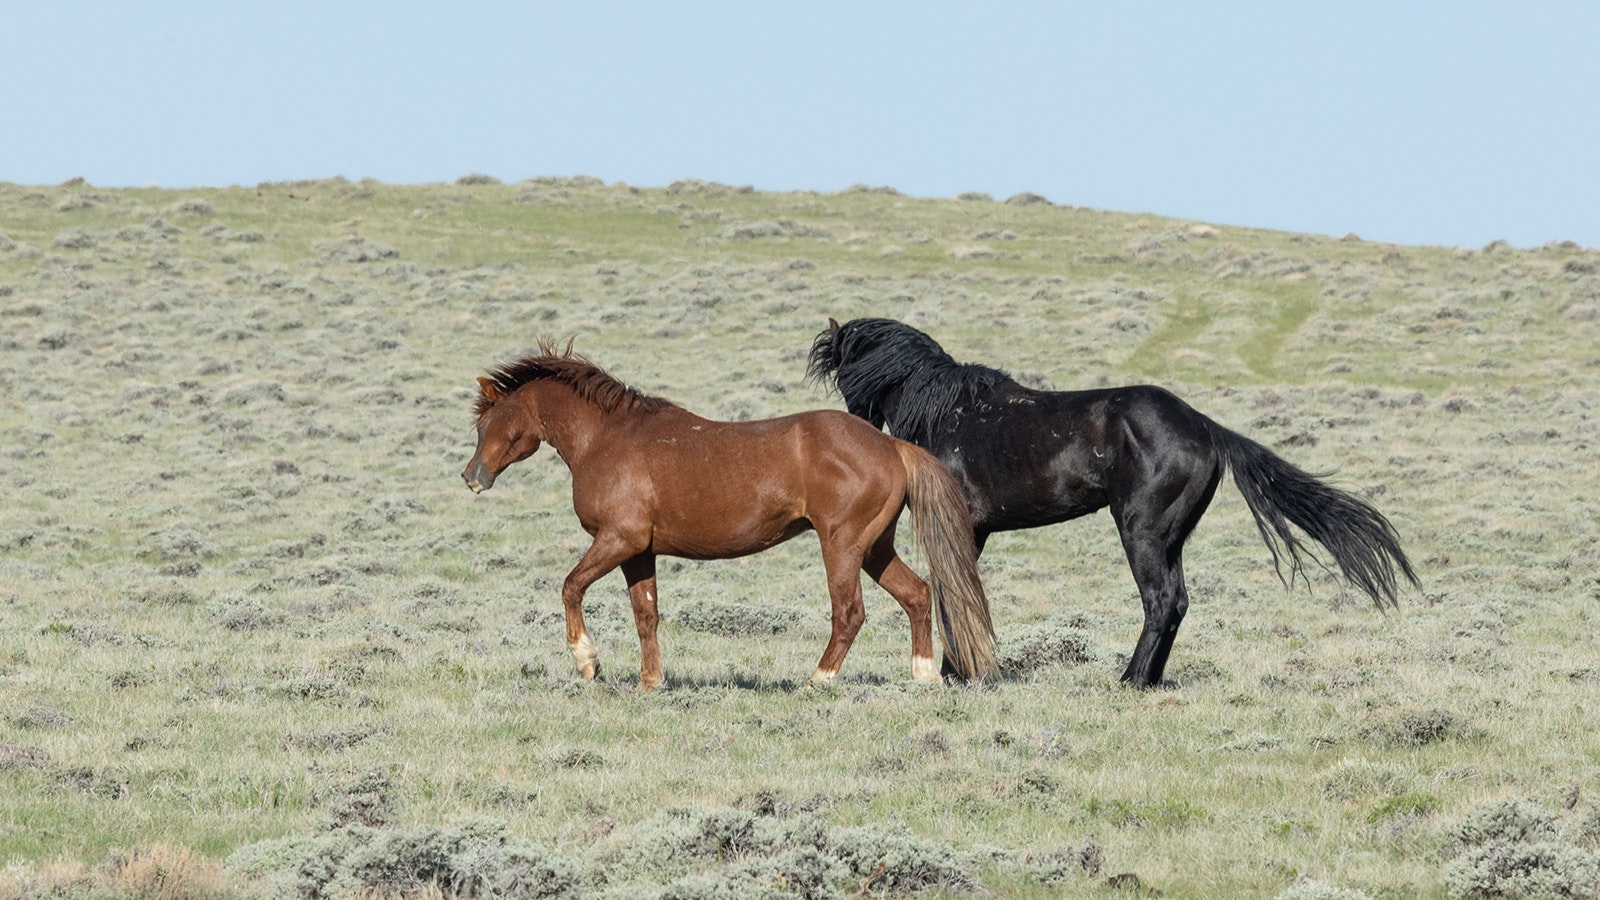 Two mustang stallions tussle over territory and mares on the open range near Jeffrey City.